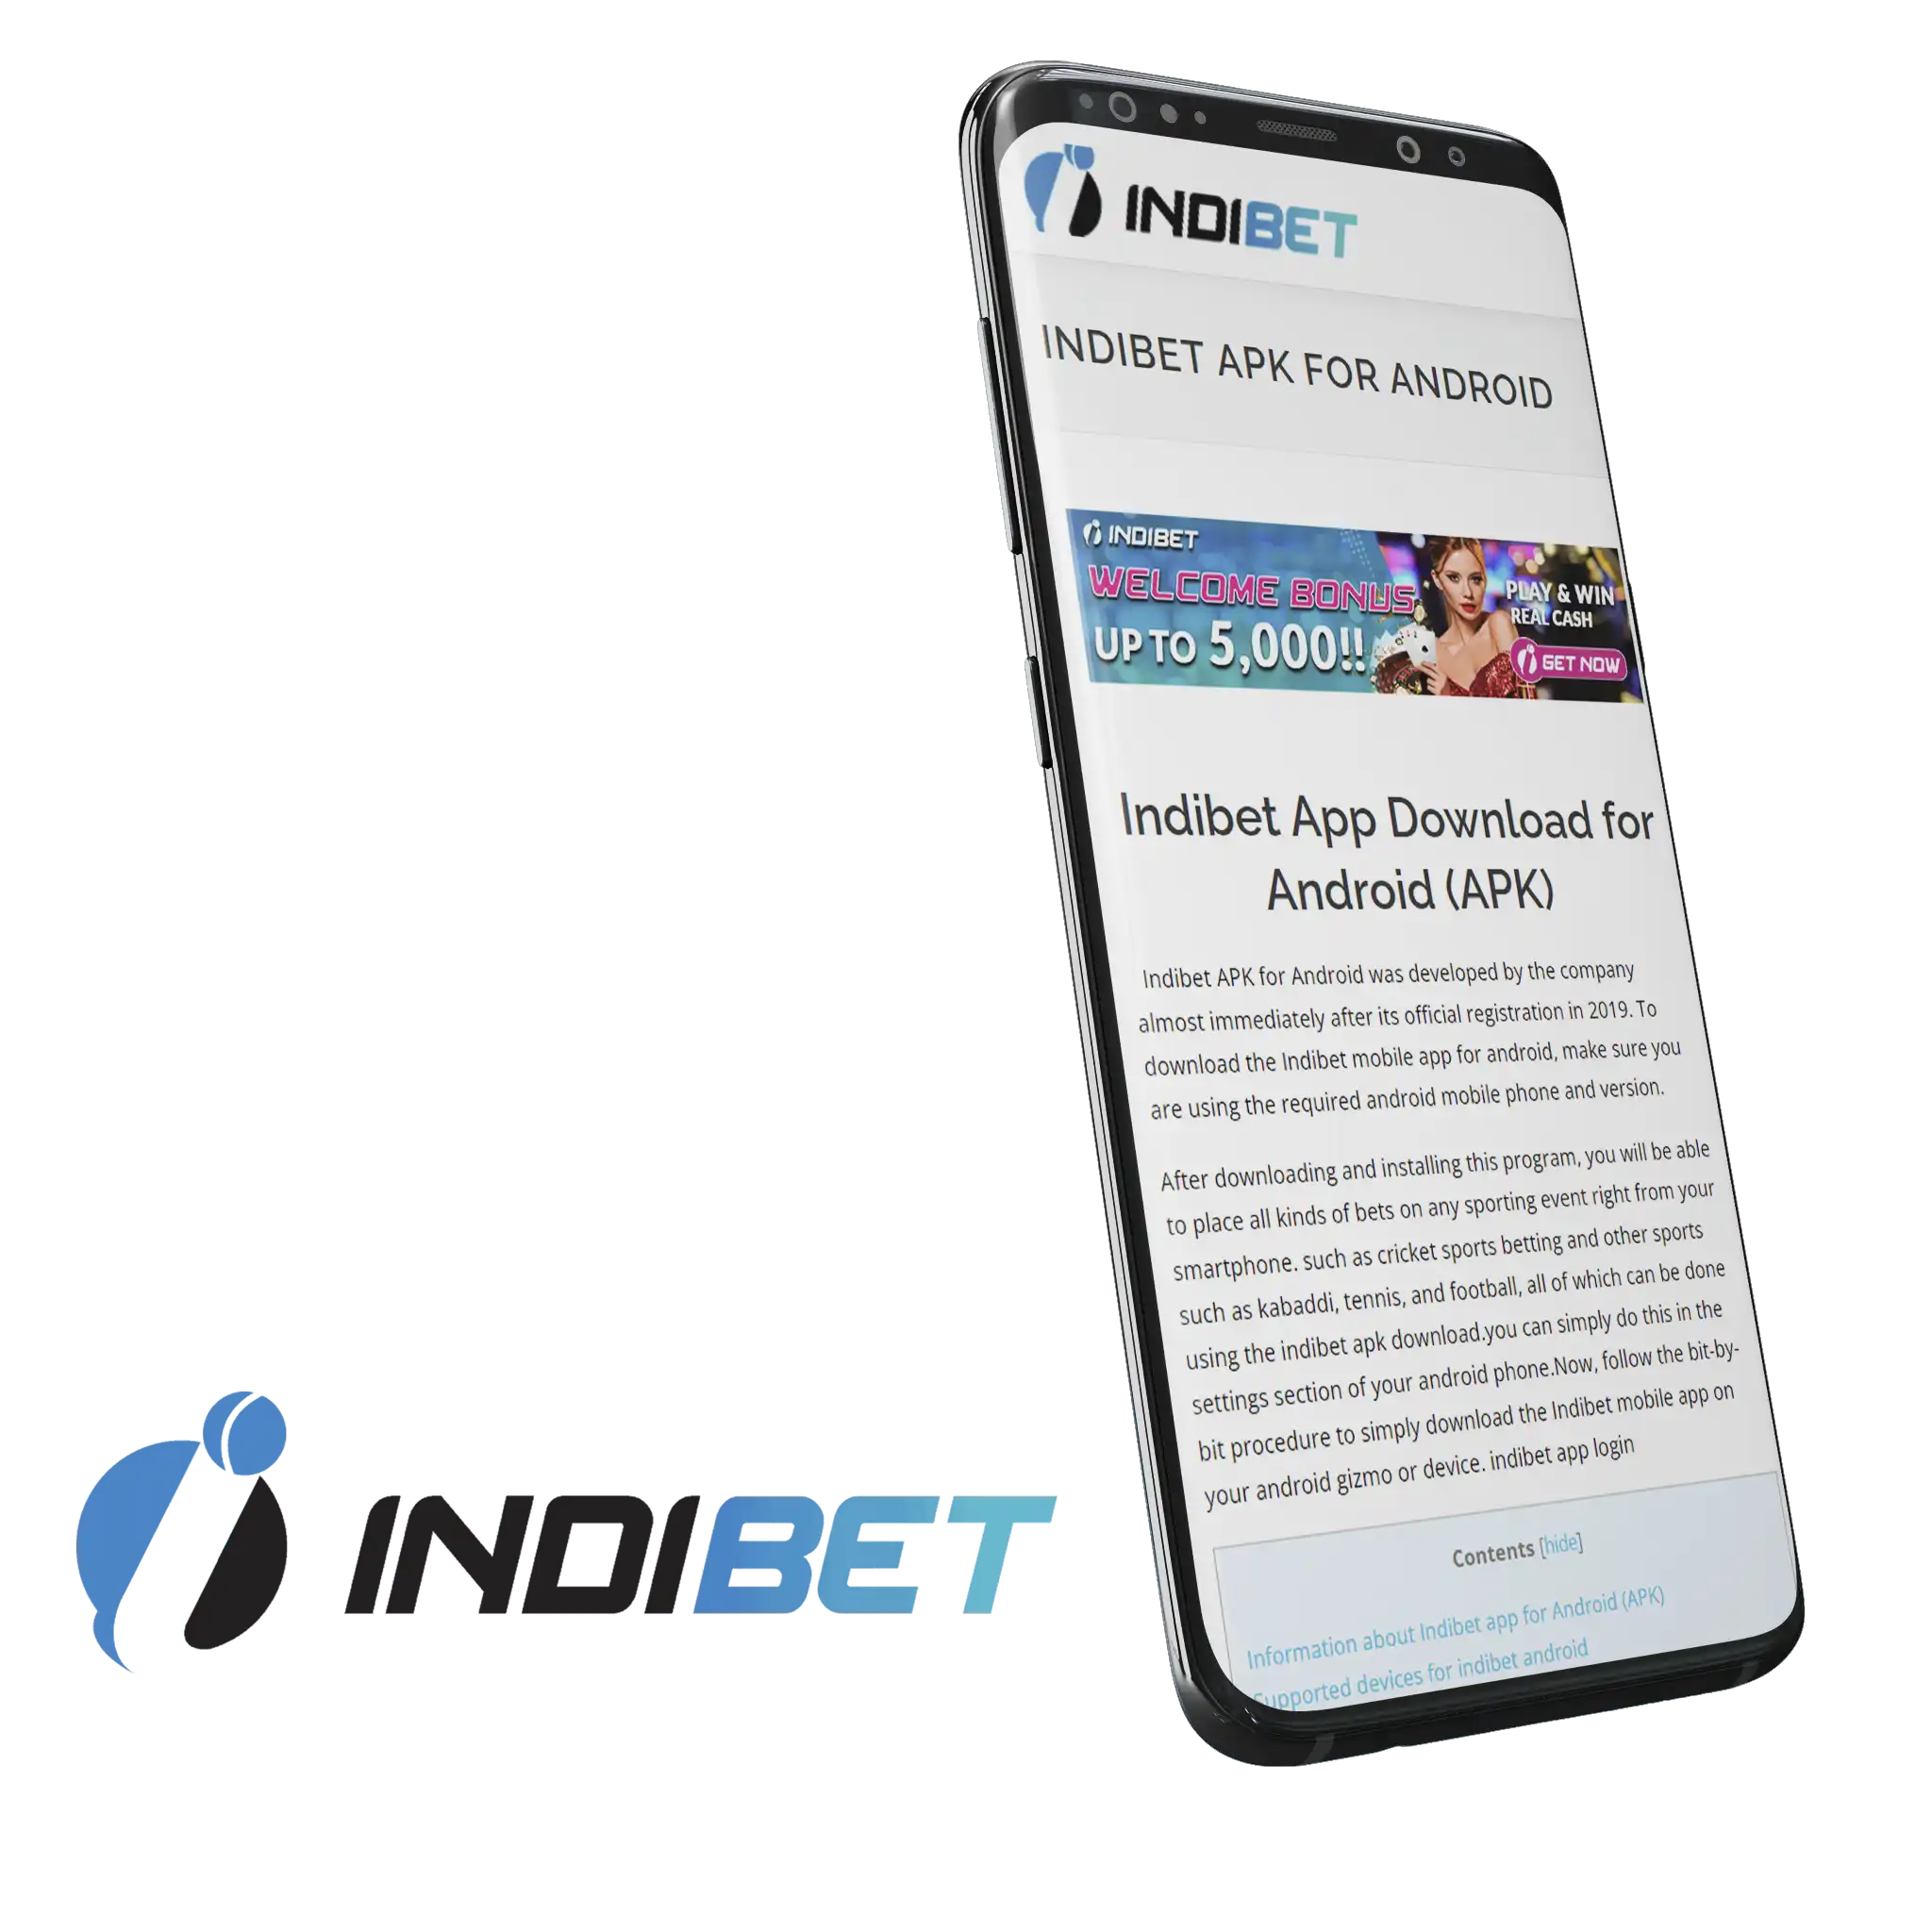 You may start a spectacular online betting journey by downloading the incredible Indibet mobile app.